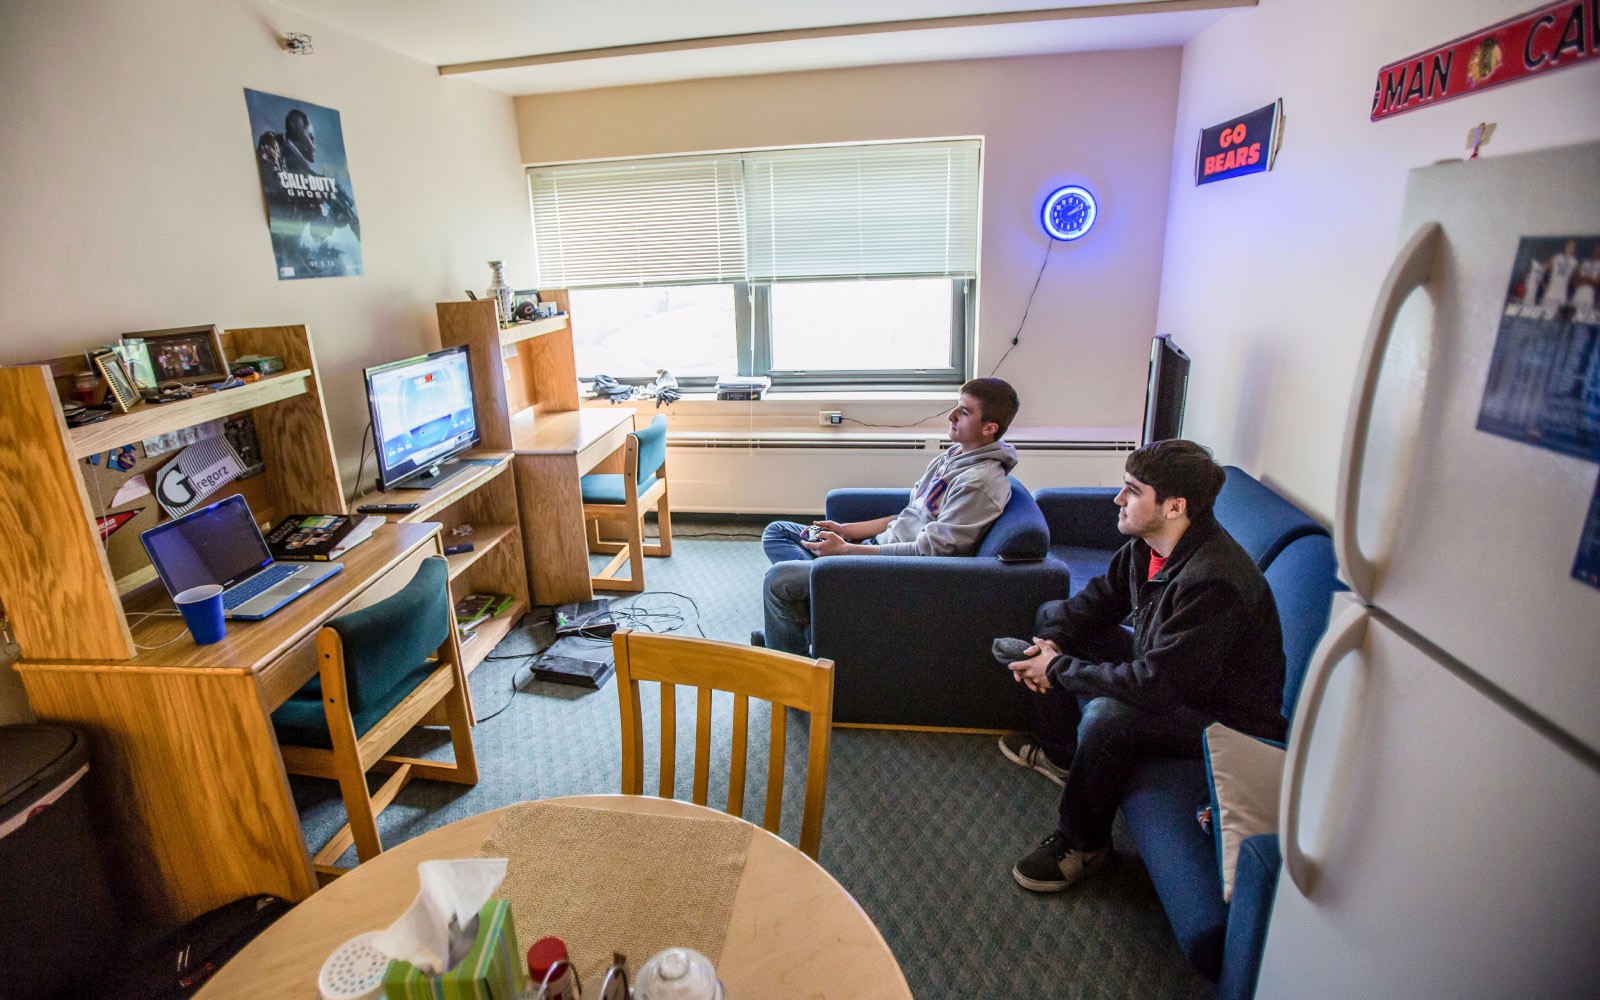 Students talking in a dorm room.